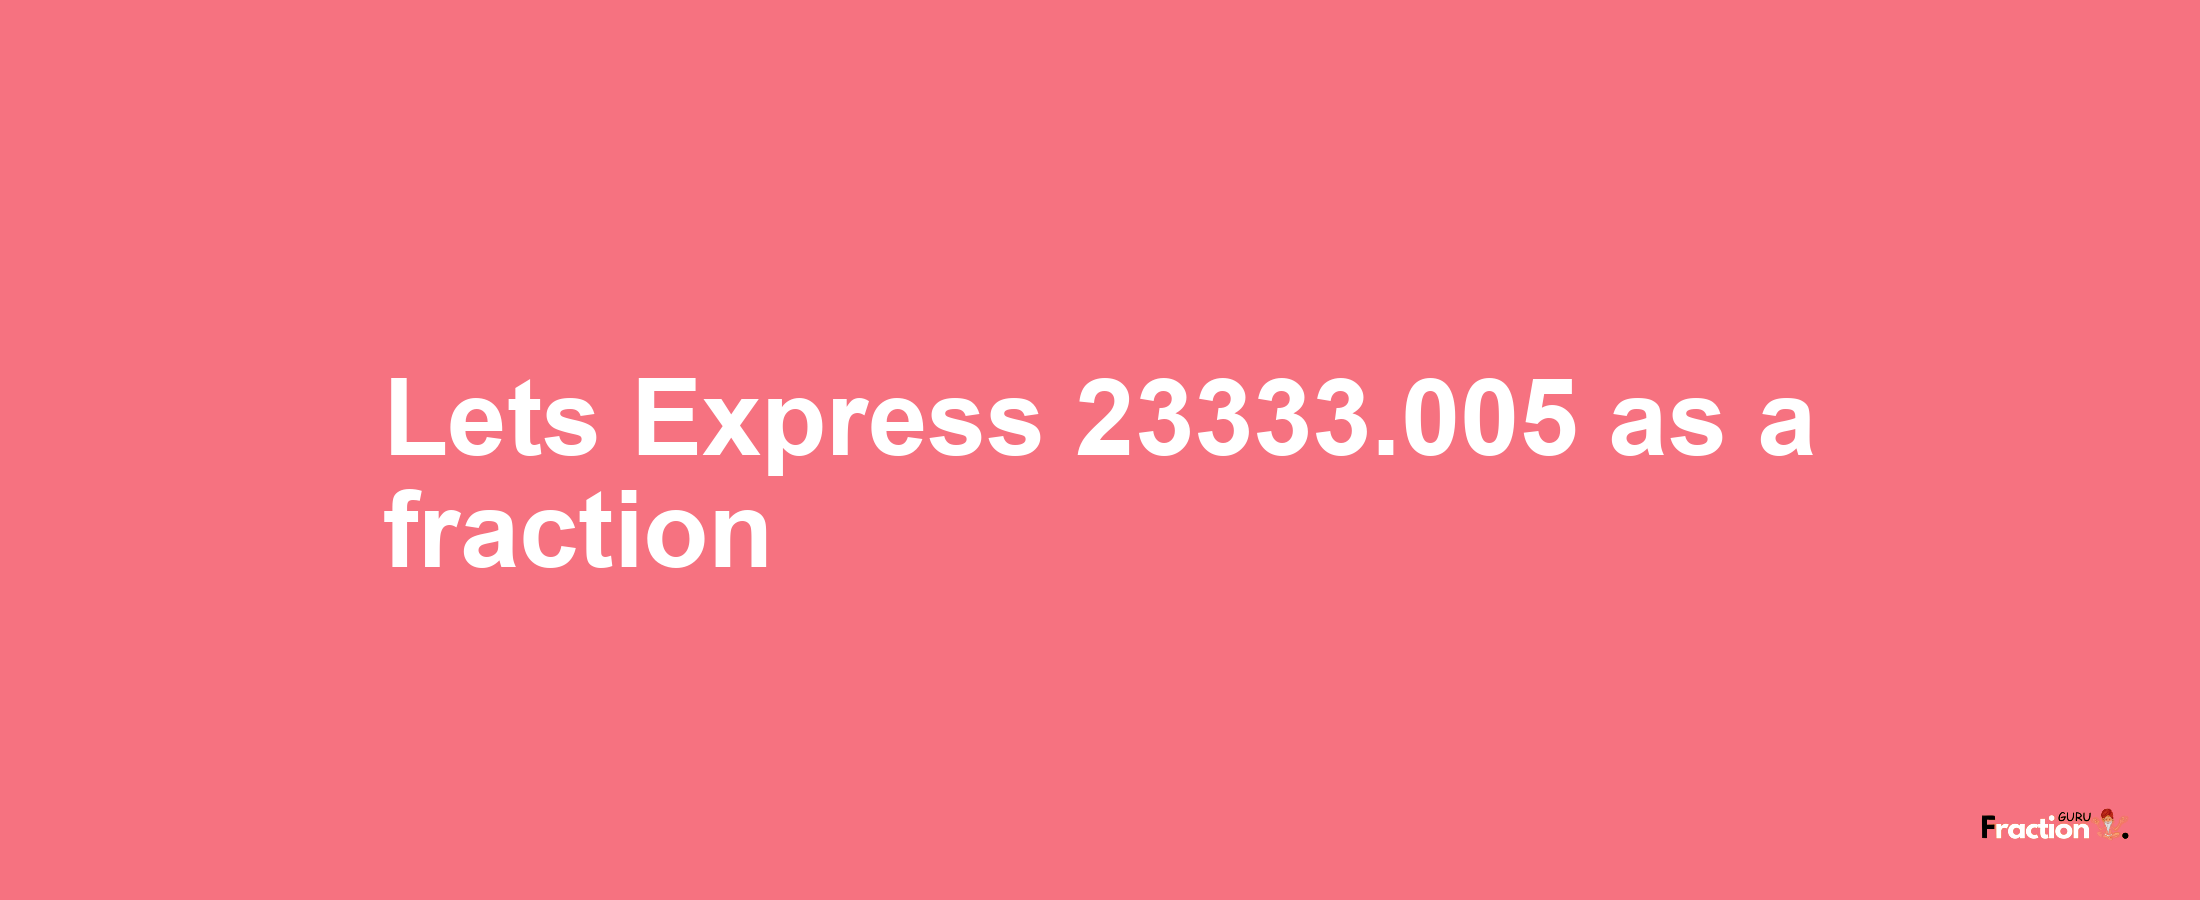 Lets Express 23333.005 as afraction